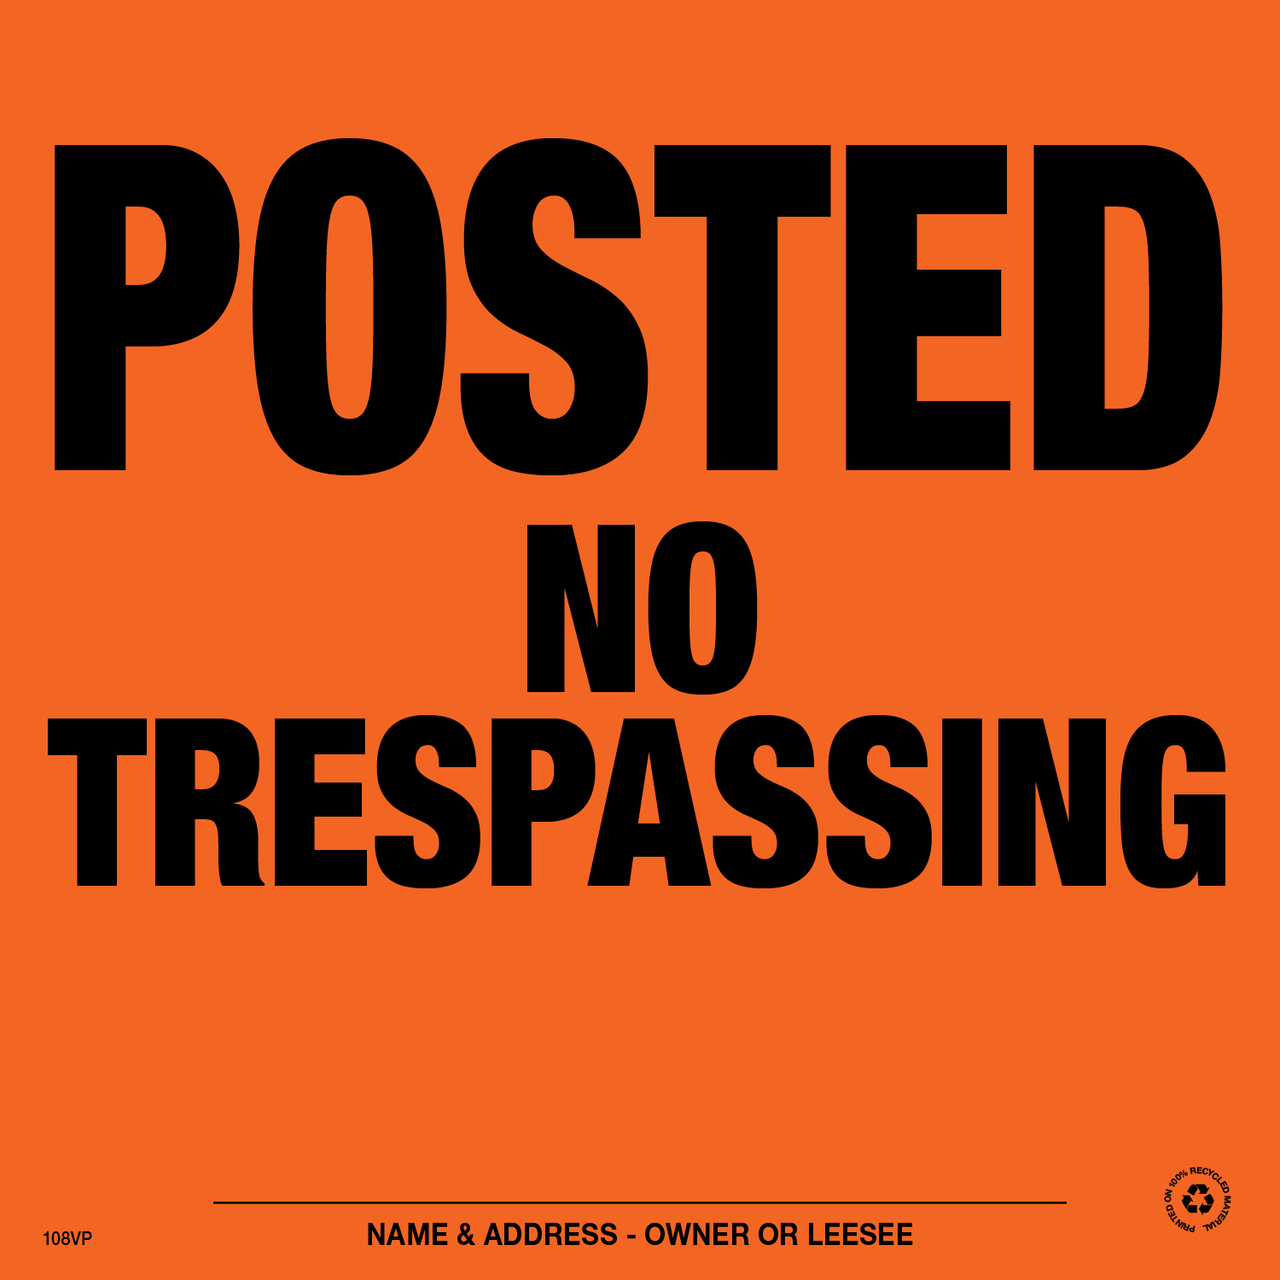 Posted No Trespassing Posted Signs - Orange Aluminum - Pack of 25